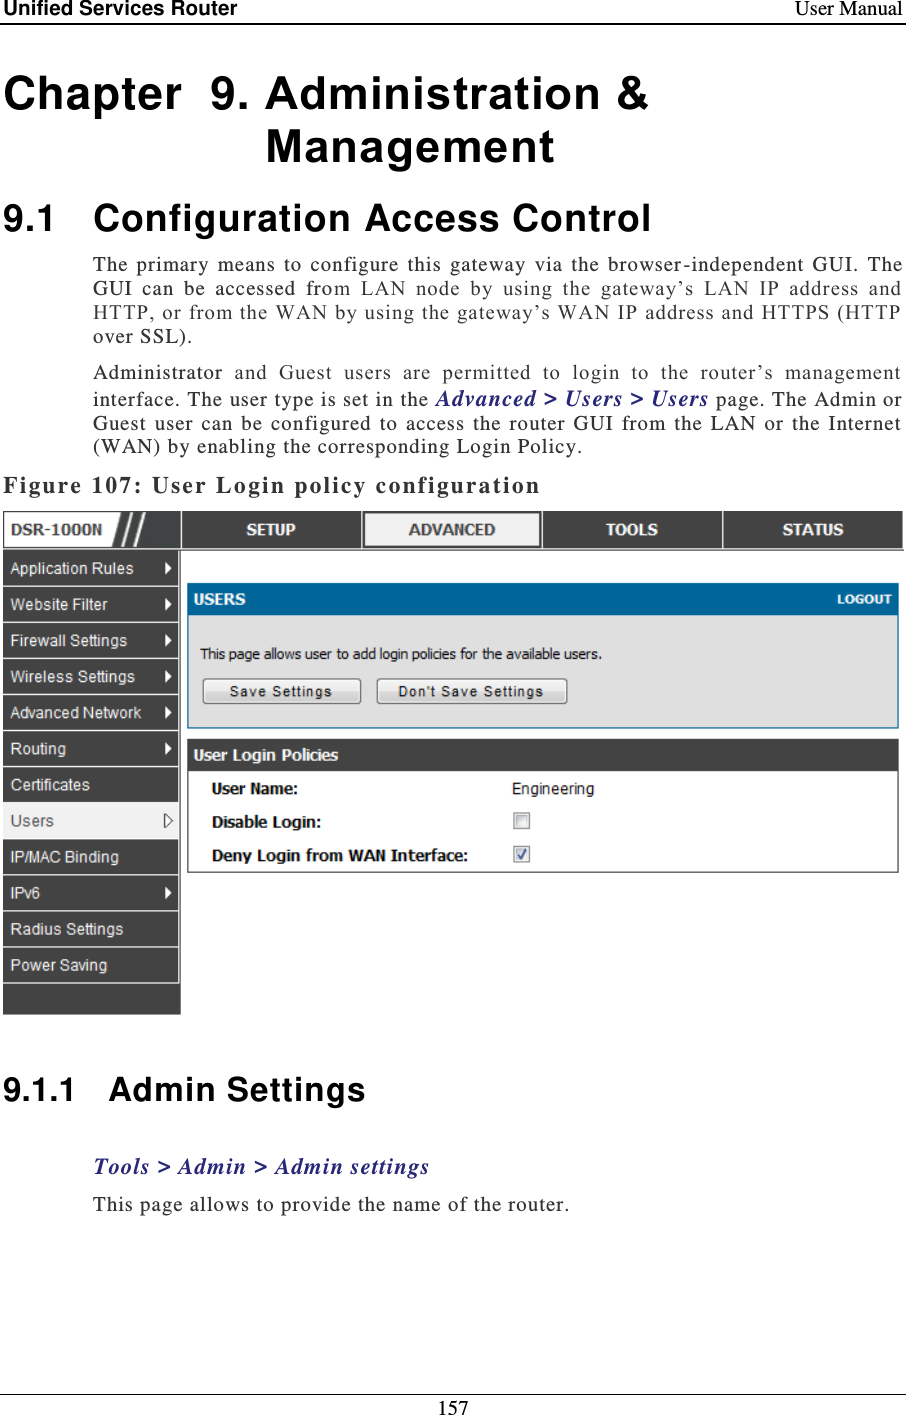 Unified Services Router    User Manual 157  Chapter  9. Administration &amp; Management 9.1  Configuration Access Control The  primary  means  to  configure  this  gateway  via  the  browser -independent  GUI.  The GUI  can  be  accessed  from  LAN  node  by  using  the  gateway’s  LAN  IP  address  and HTTP, or from the WAN by  using the gateway’s WAN IP address and HTTPS (HTTP over SSL).  Administrator  and  Guest  users  are  permitted  to  login  to  the  router’s  management interface. The user type is set in the Advanced &gt; Users &gt; Users page. The Admin or Guest  user  can  be  configured  to  access  the  router  GUI  from  the  LAN  or  the  Internet  (WAN) by enabling the corresponding Login Policy.   Figure 107:  User Login policy c onfiguration    9.1.1 Admin Settings Tools &gt; Admin &gt; Admin settings  This page allows to provide the name of the router.    